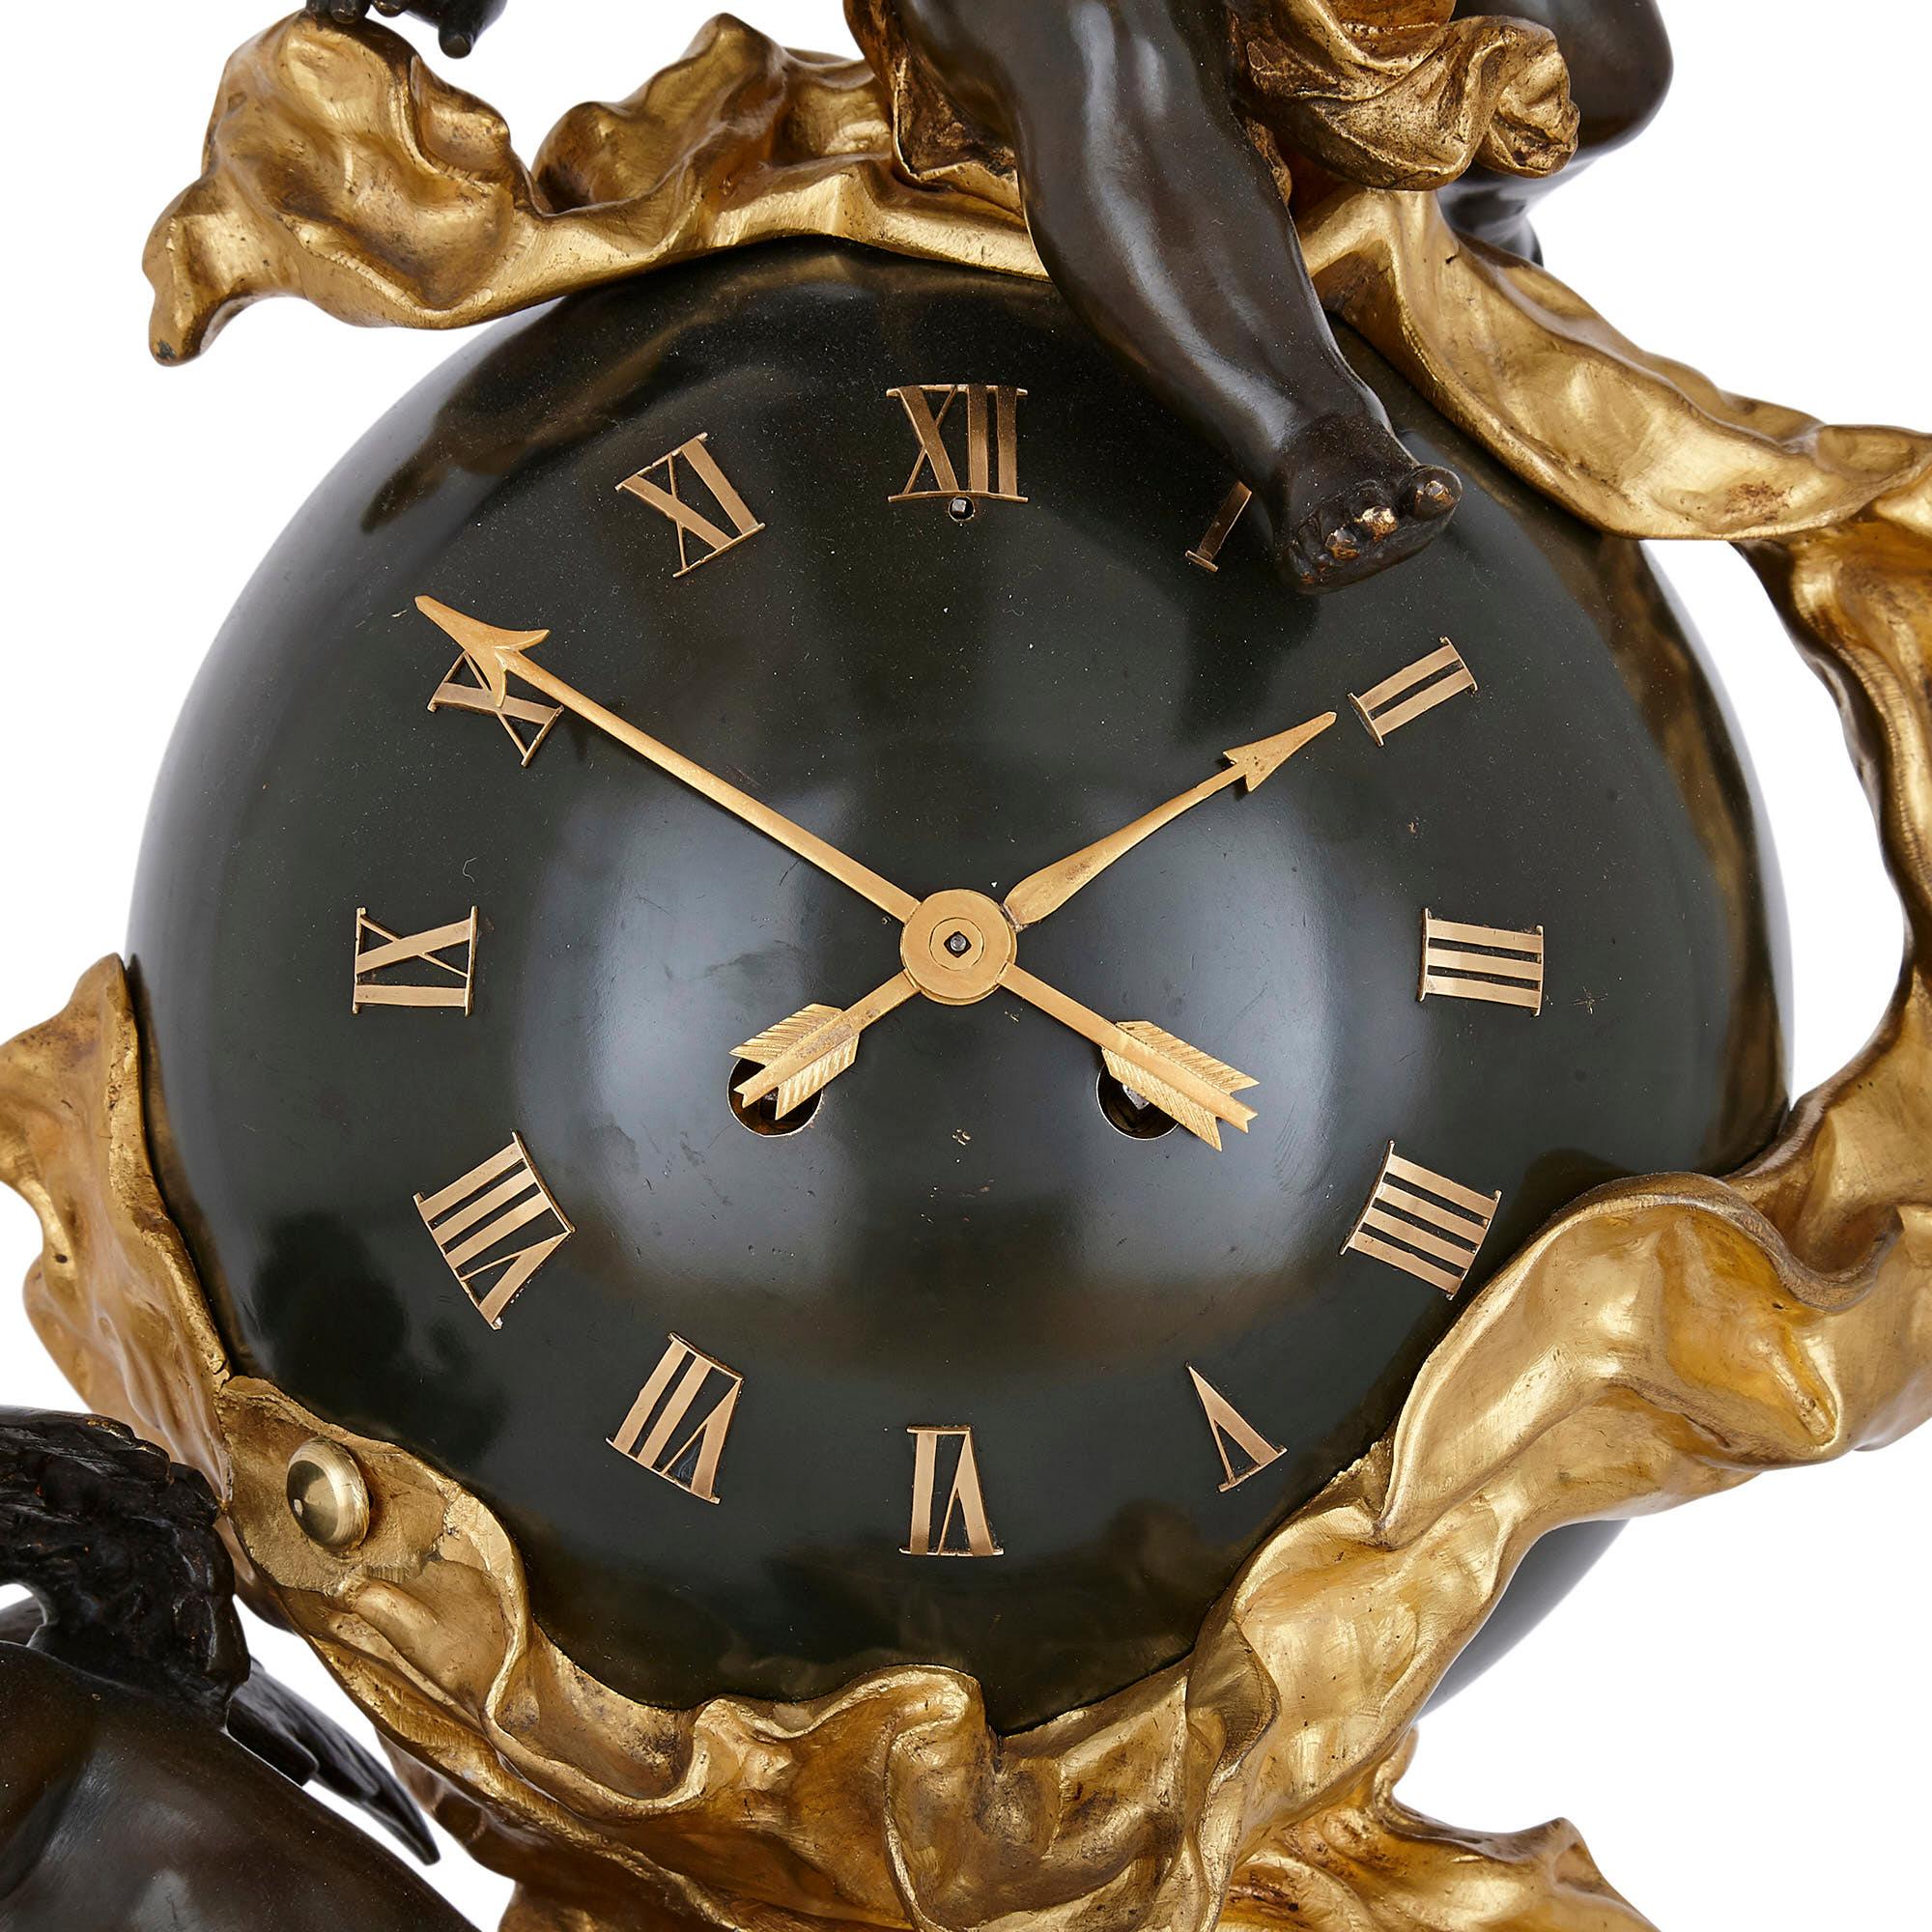 Baroque style bronze and ormolu cherub mantel clock
French, late 19th century
Measures: Height 69cm, width 35cm, depth 26.5cm

This dramatic and expressive mantel clock is a fine example of the Baroque style. The clock is crafted from gilt and